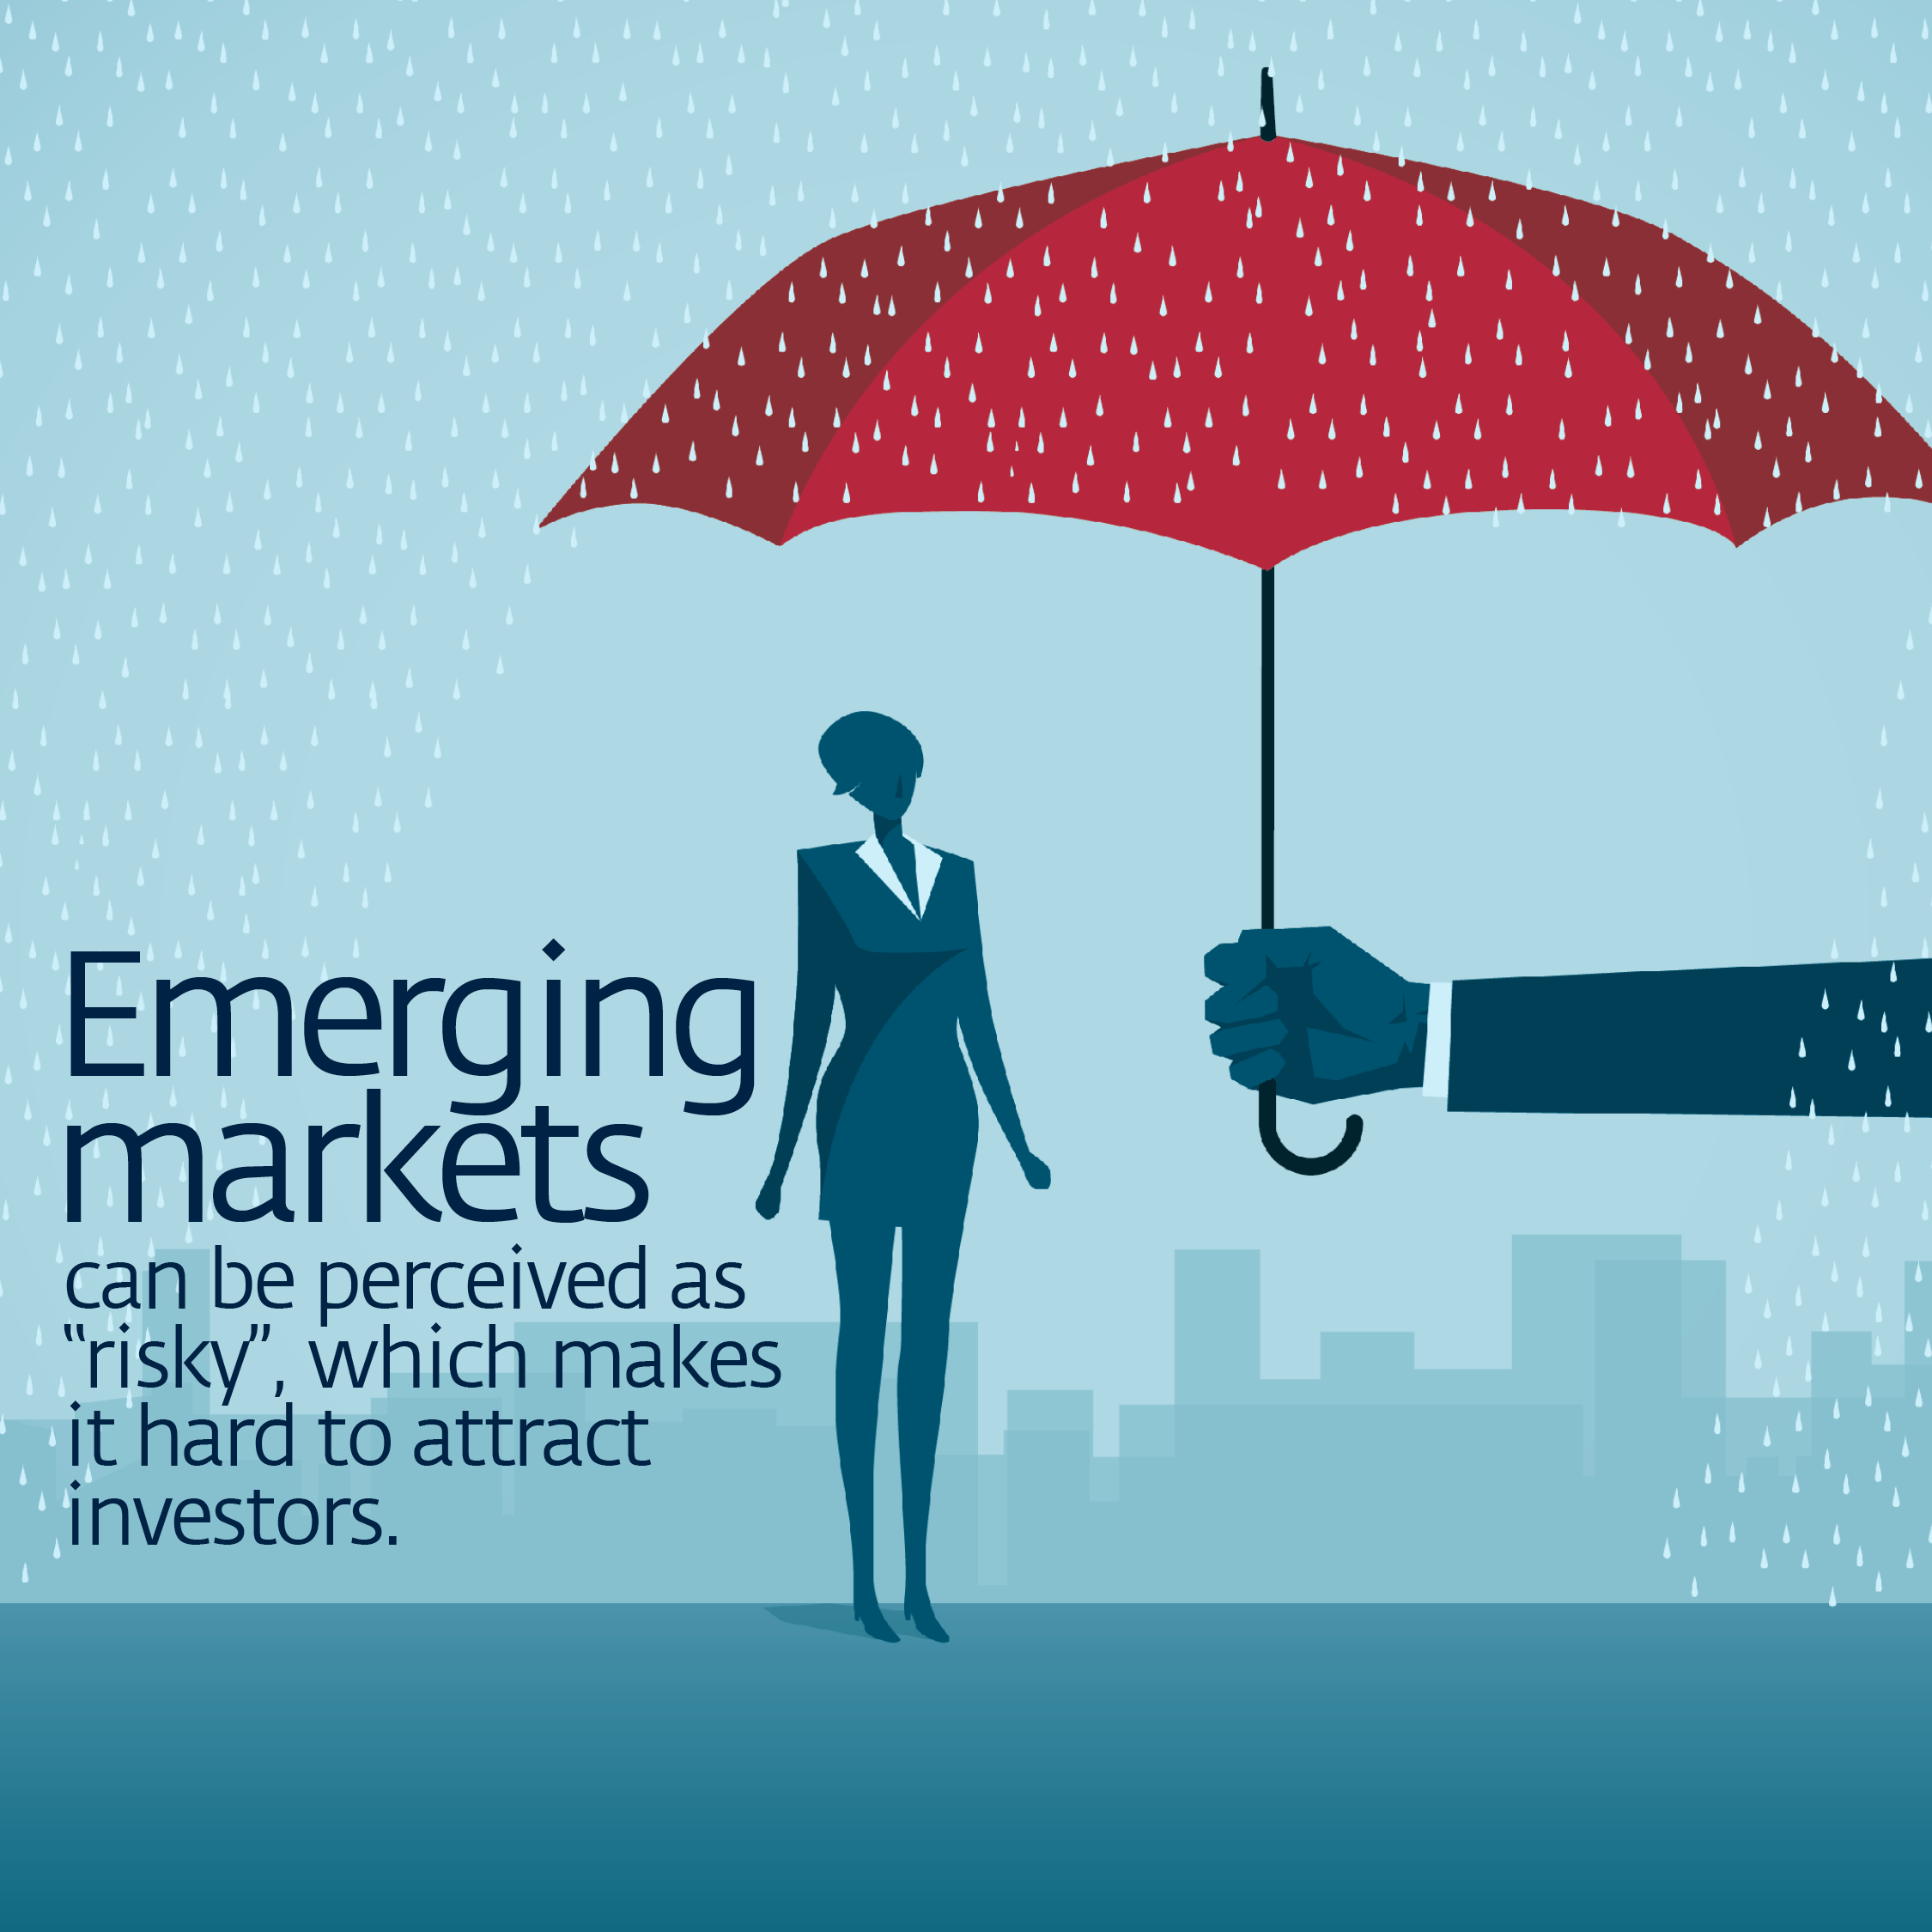 Emerging markets can be perceived as risky